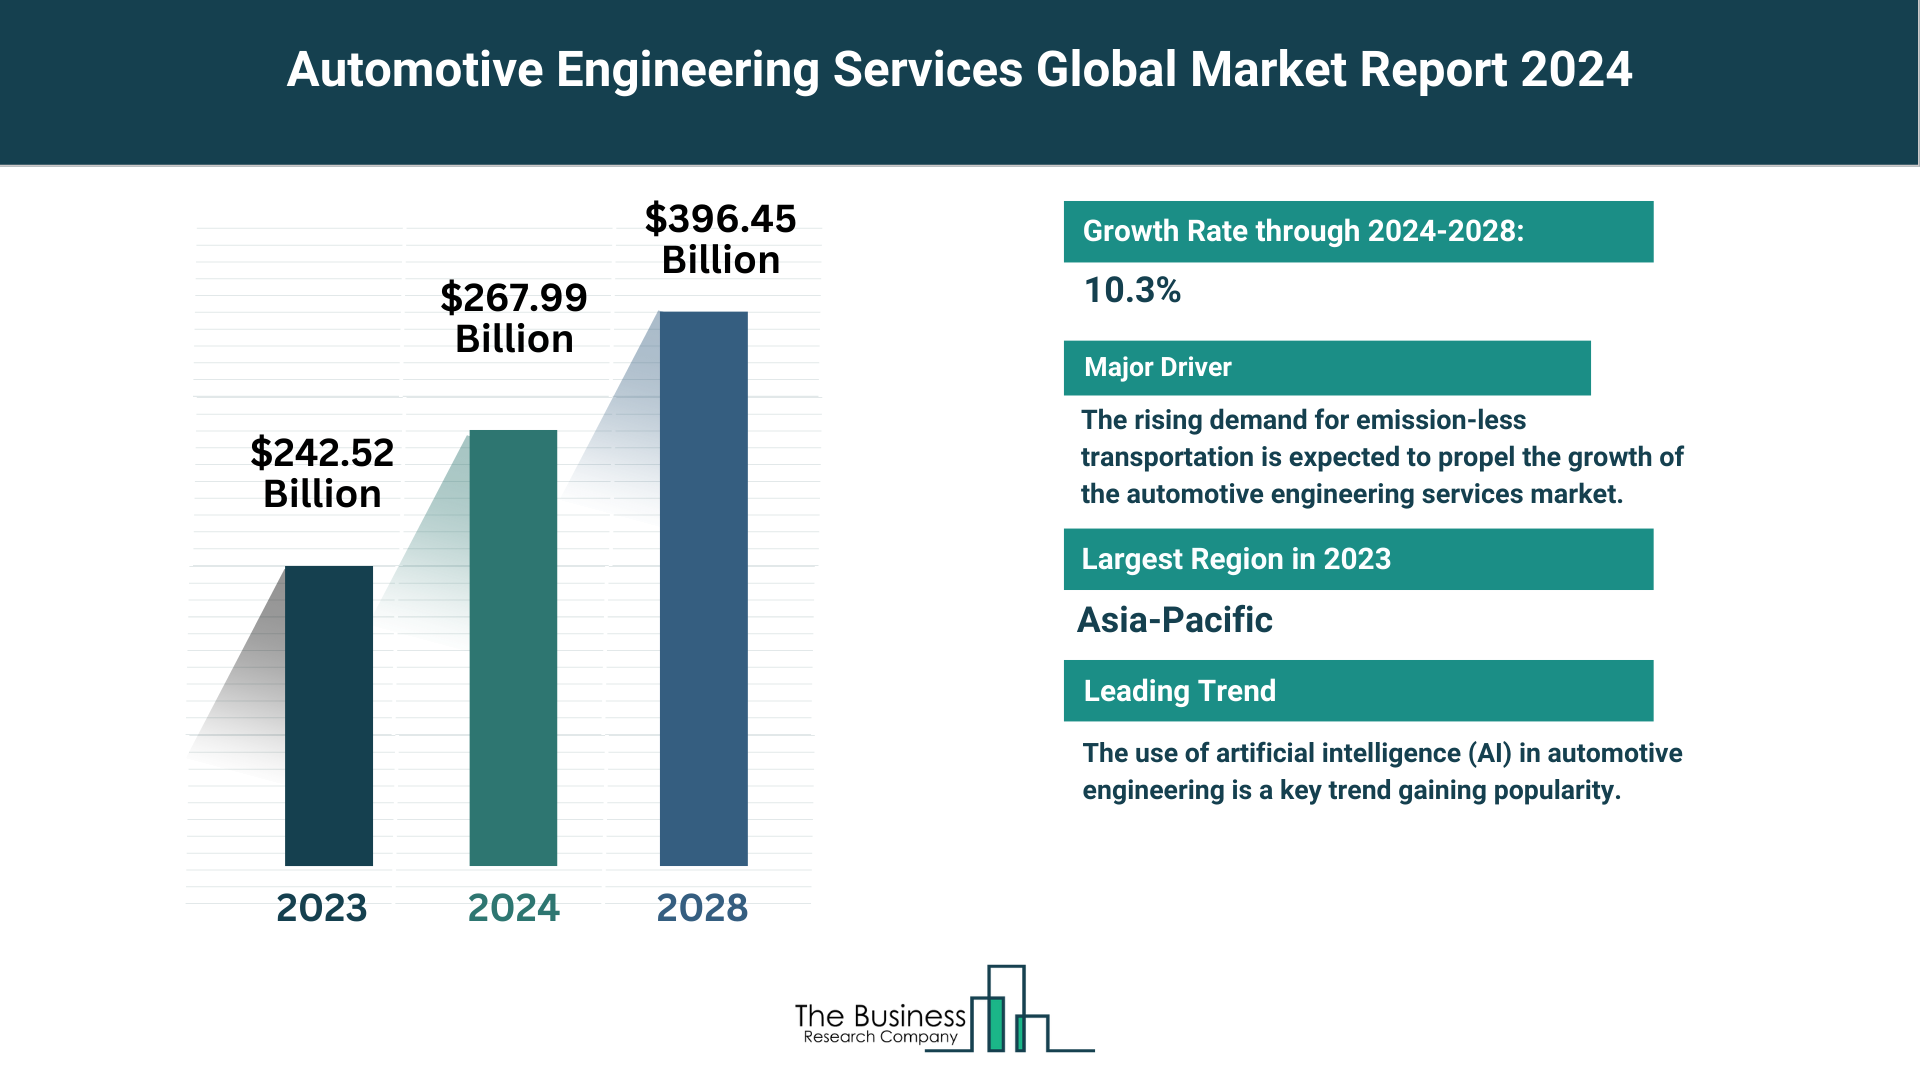 How Is the Automotive Engineering Services Market Expected To Grow Through 2024-2033?